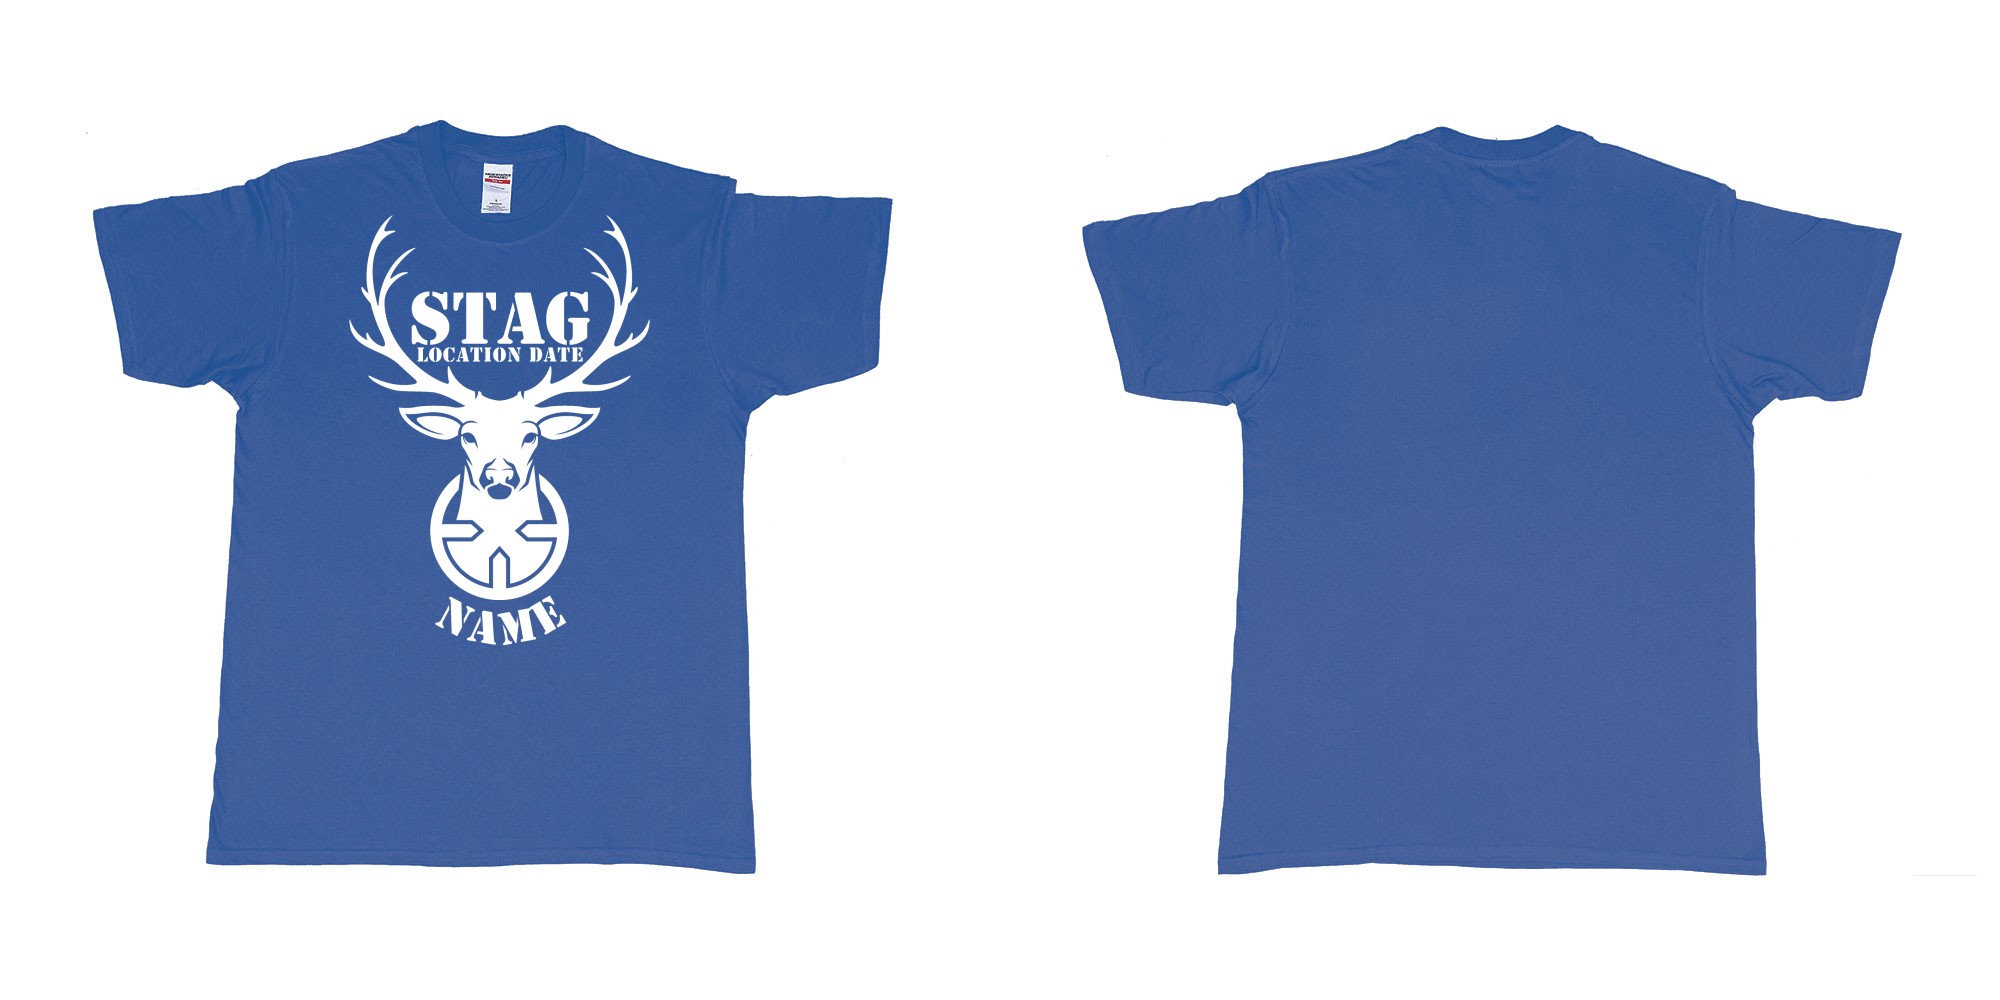 Custom tshirt design aiming for a stag custom tshirt print in fabric color royal-blue choice your own text made in Bali by The Pirate Way